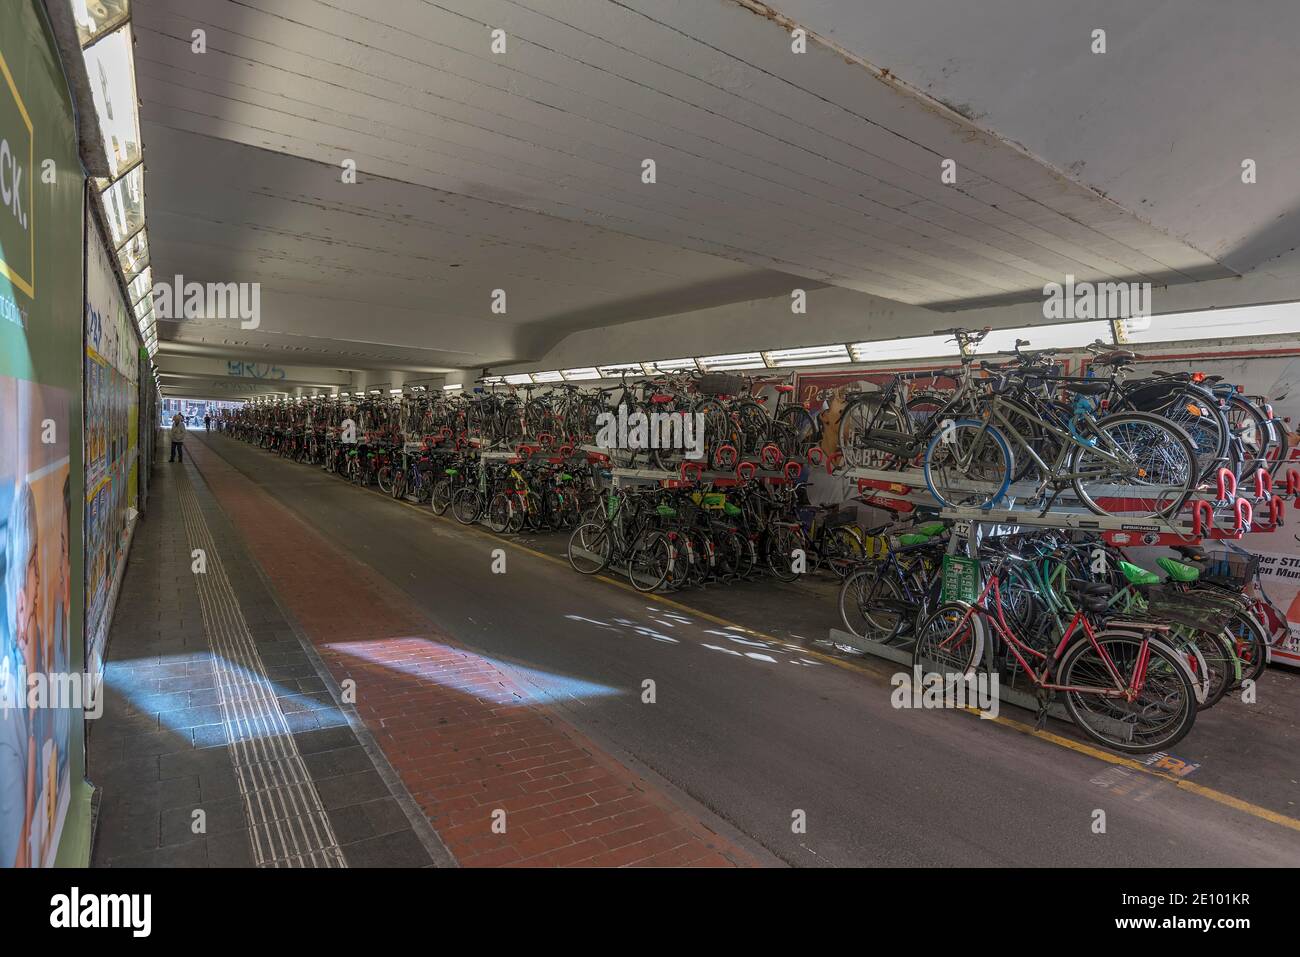 Conversion of a former underpass into a parking garage for bicycles, Münster, North Rhine-Westphalia, Germany, Europe Stock Photo